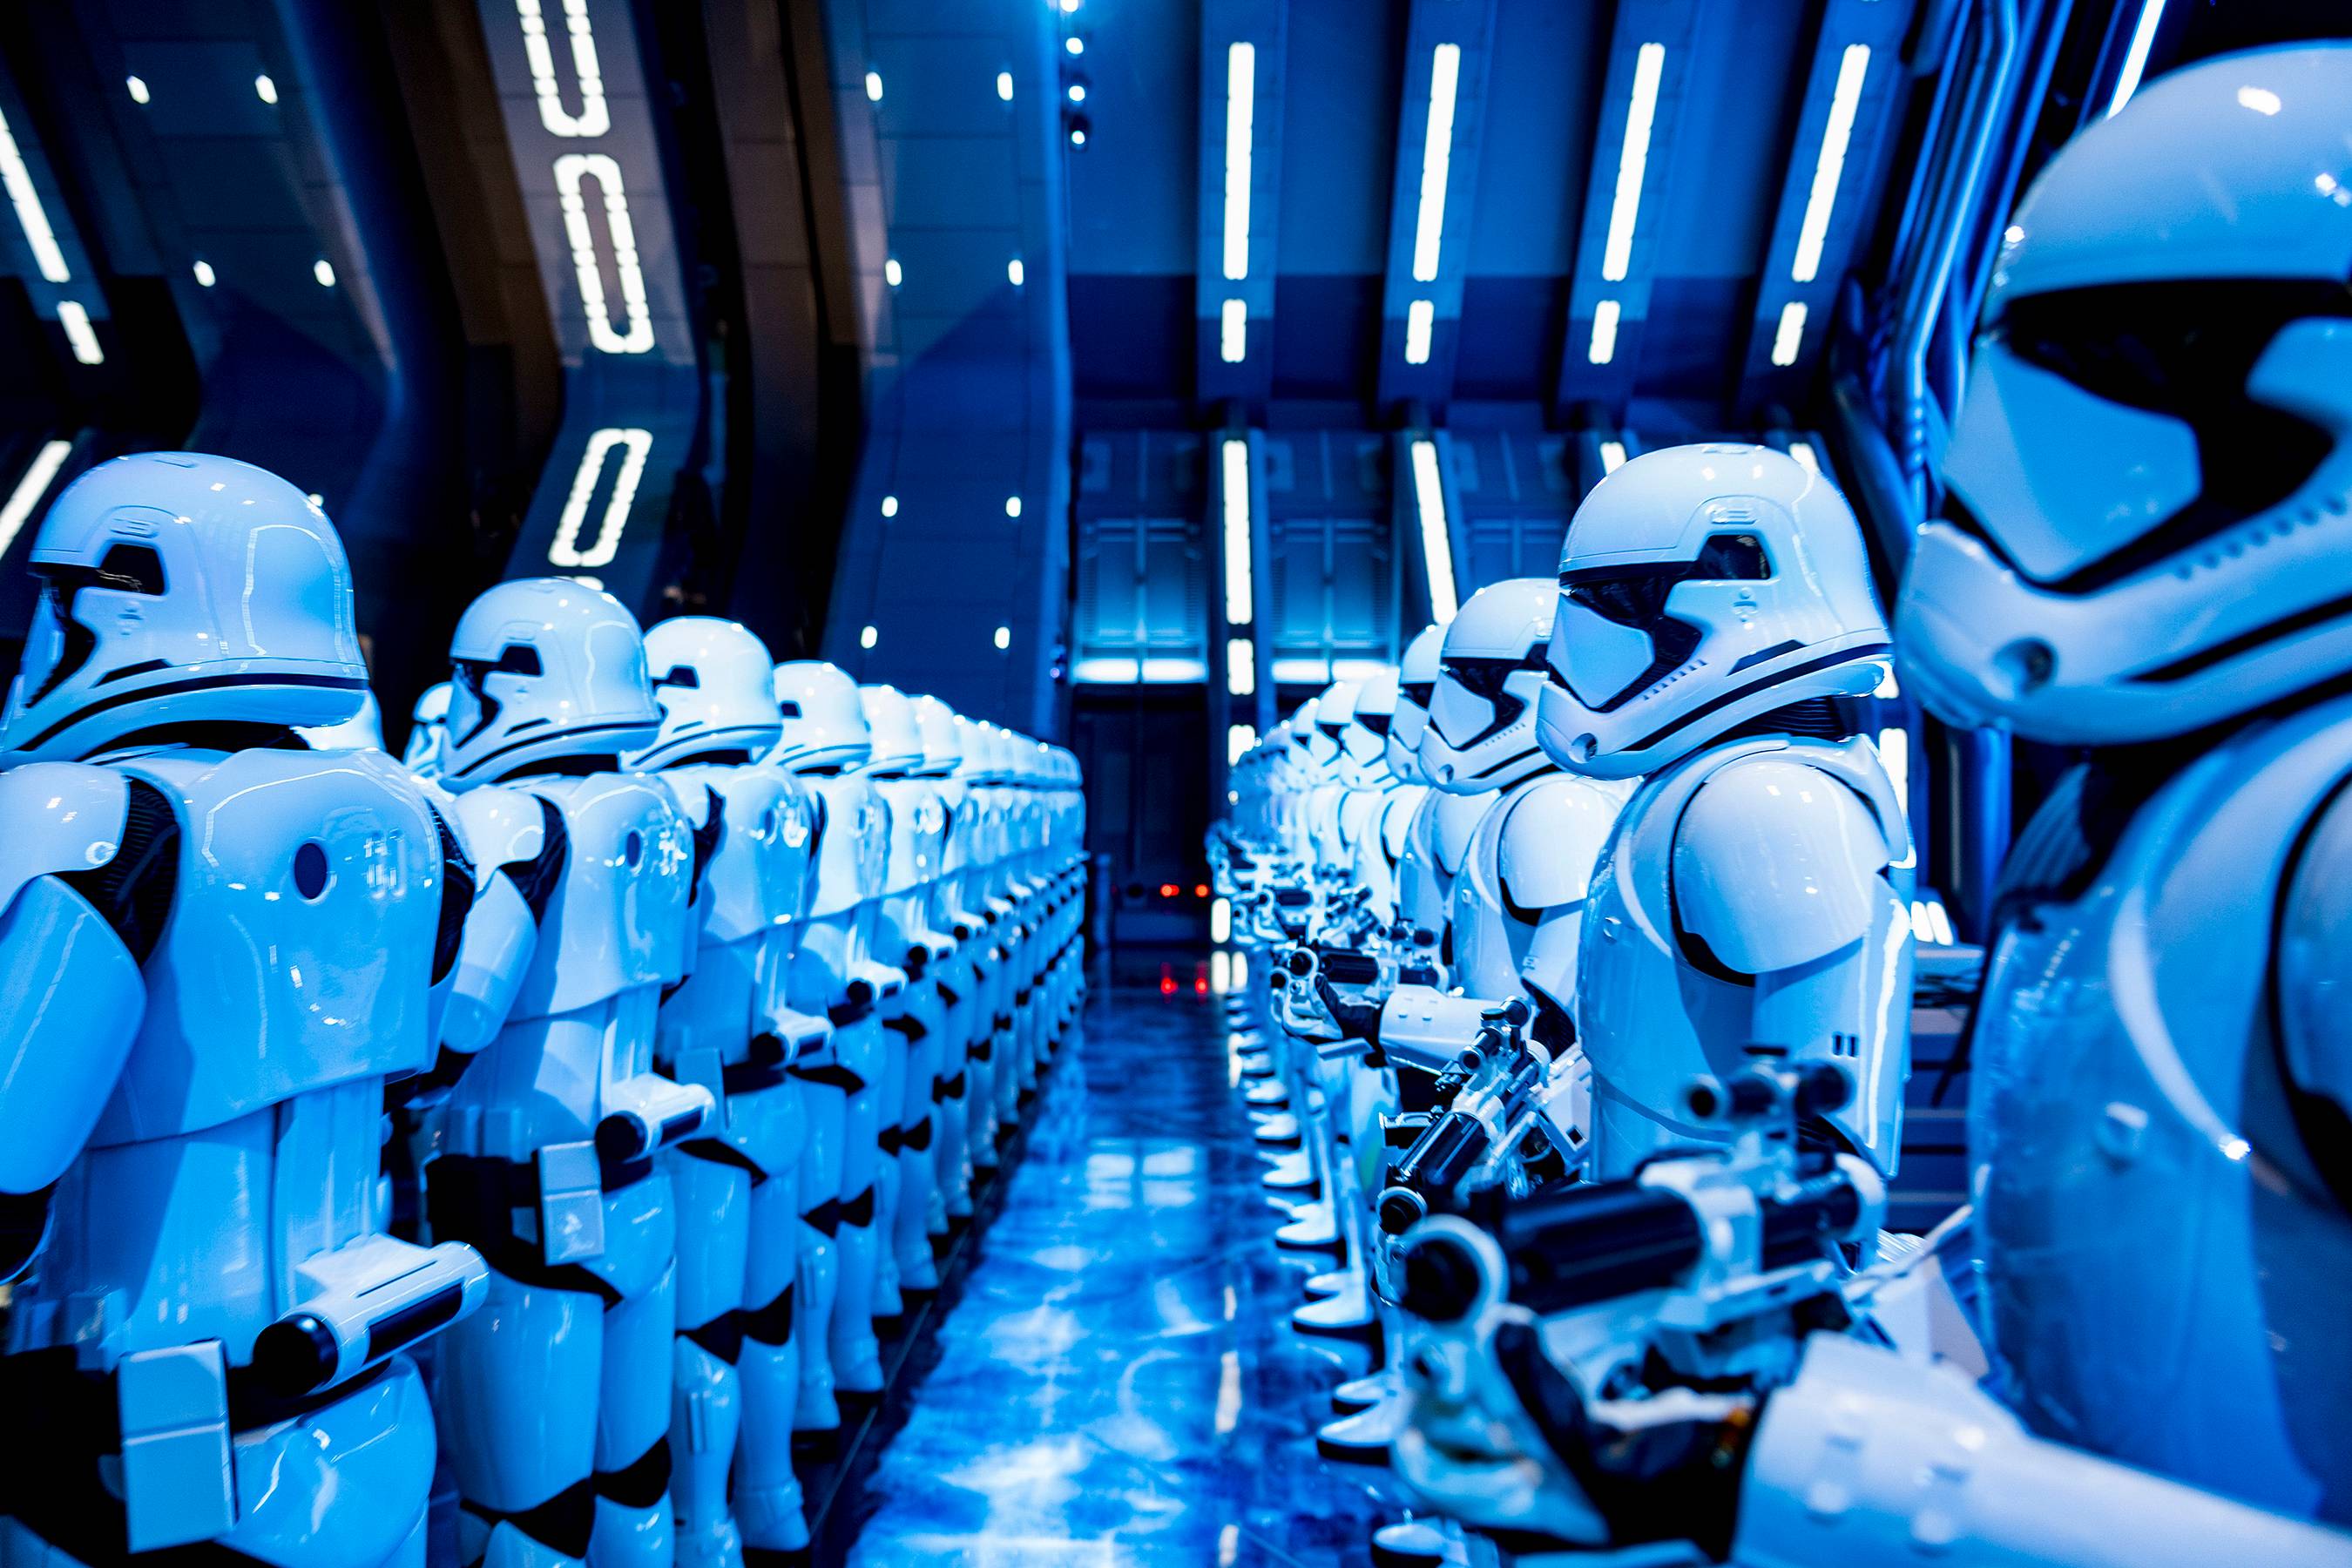 Inside the queue and ride of Star Wars Rise of the Resistance